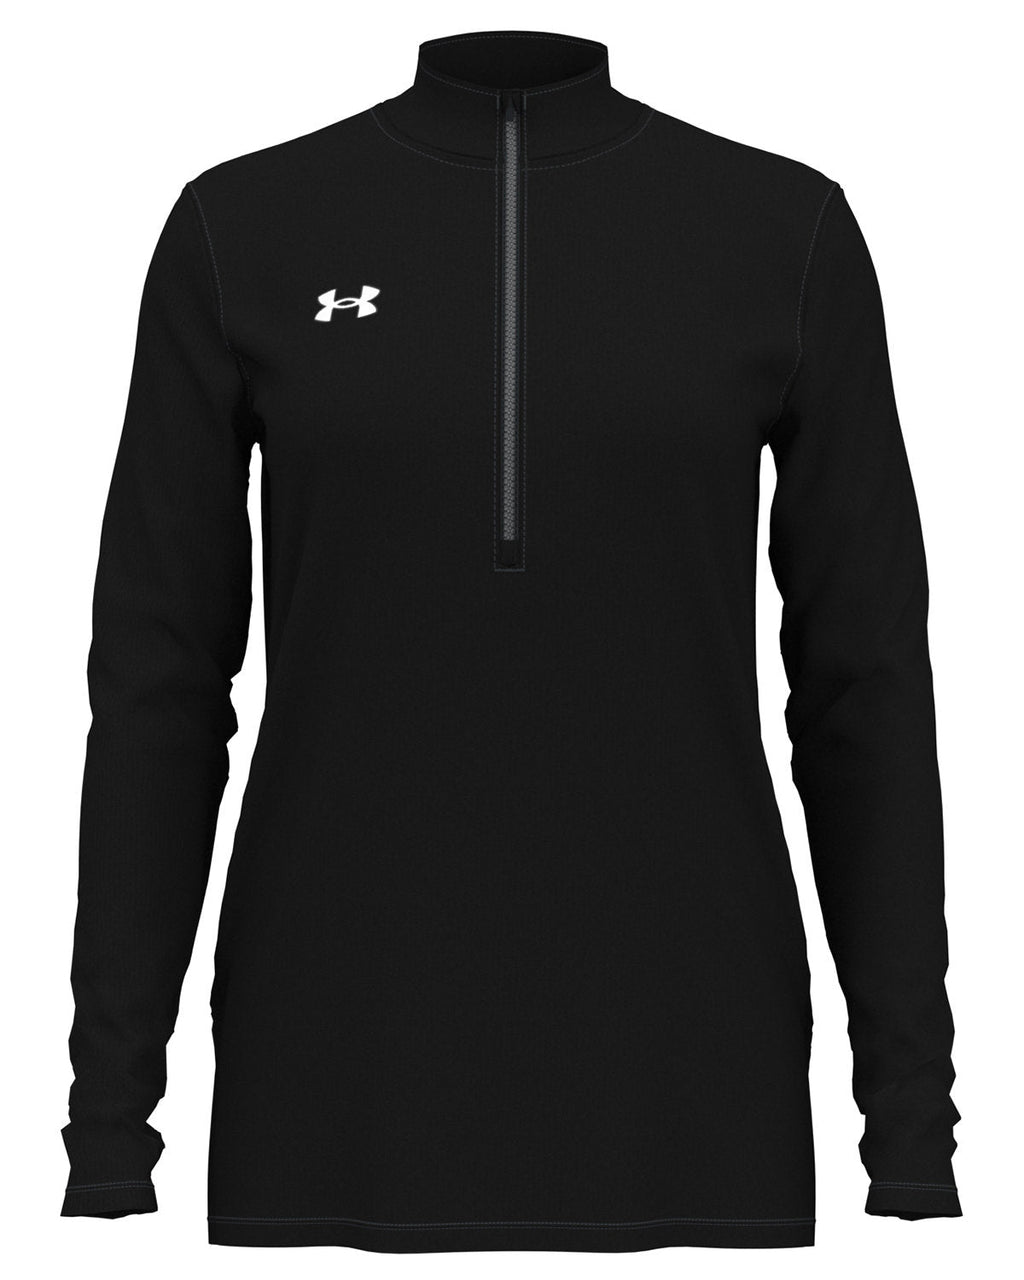 Under Armour Ladies Team Tech Half-Zip with Custom Embroidery, 1376862